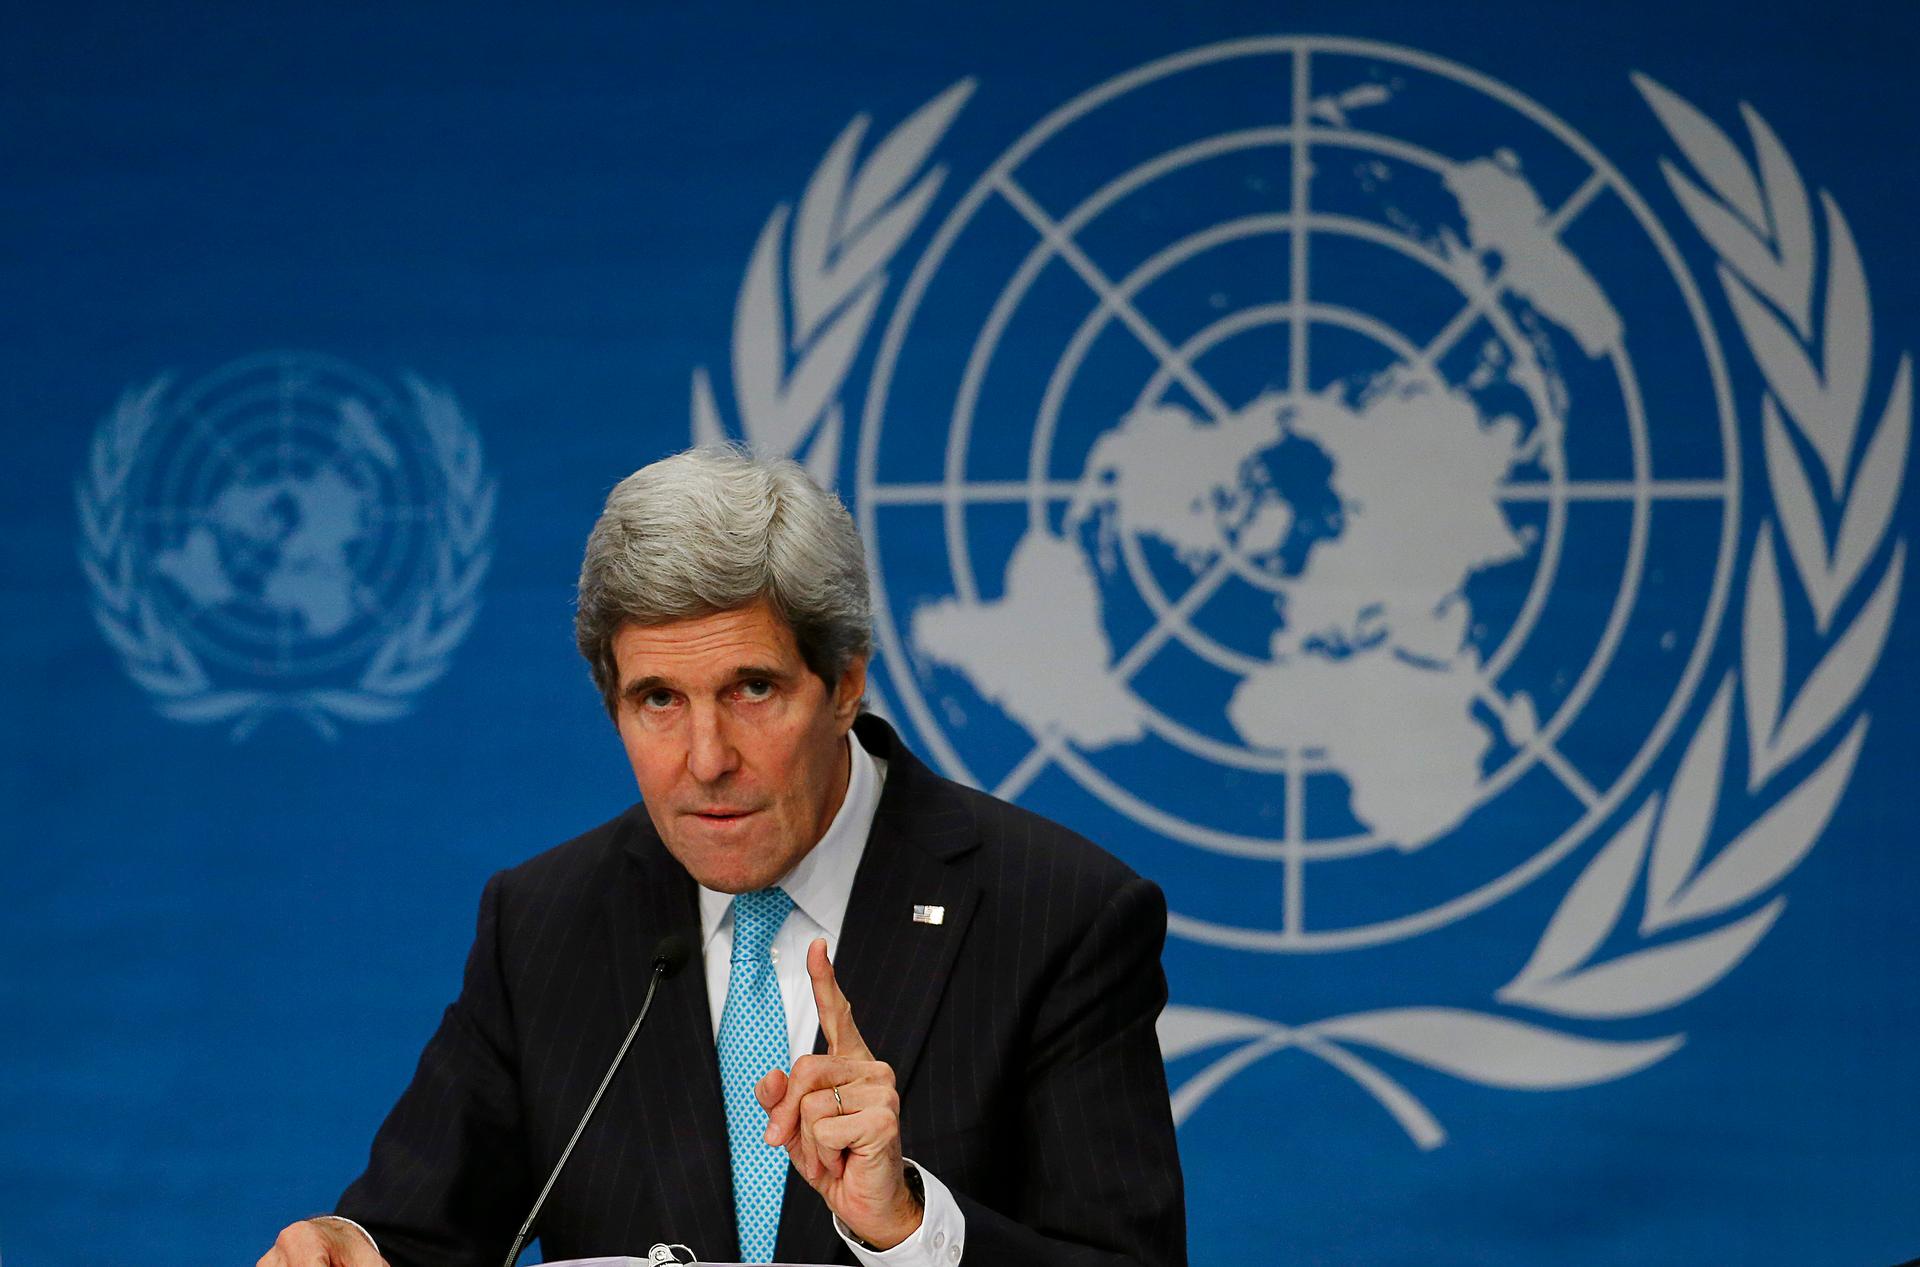 US Secretary of State John Kerry addresses a news conference after the Geneva-2 peace talks in Montreux January 22, 2014.